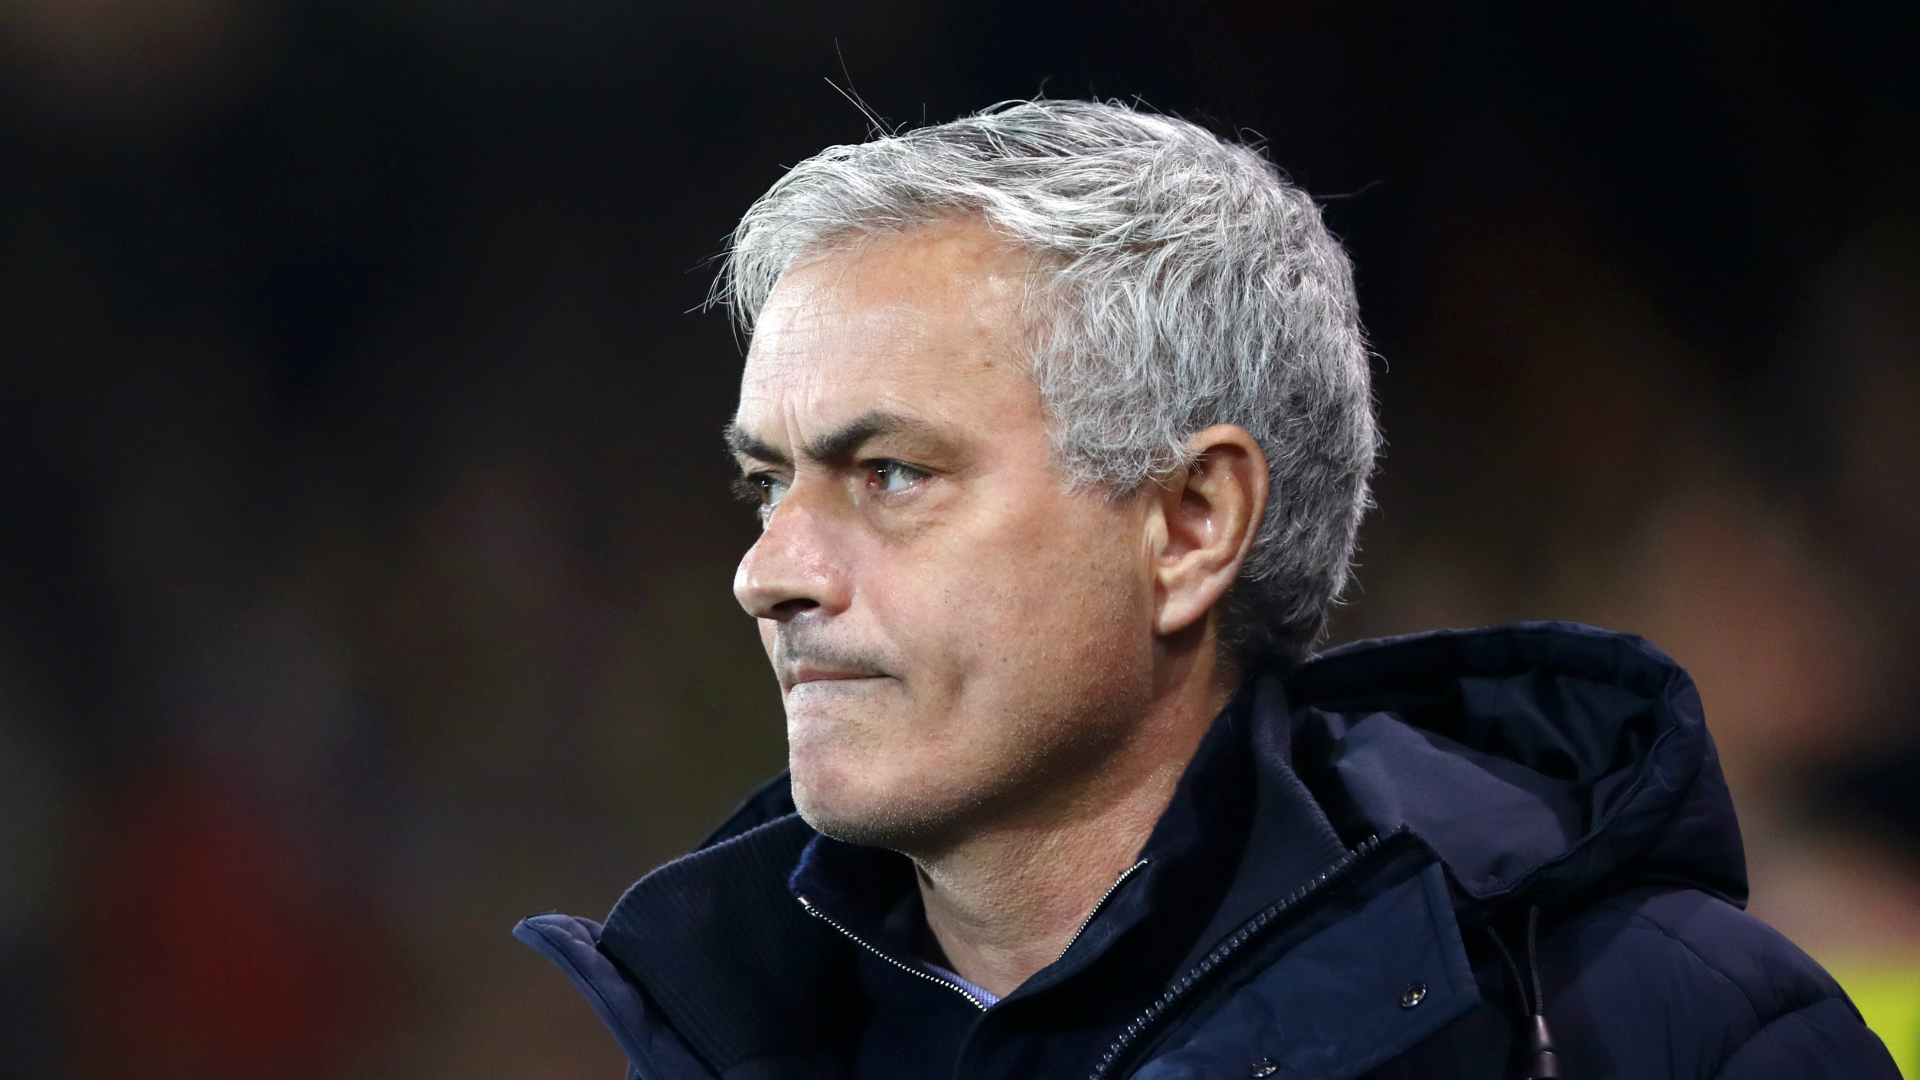 Tottenham head coach Jose Mourinho lamented the timing of his side's upcoming break.